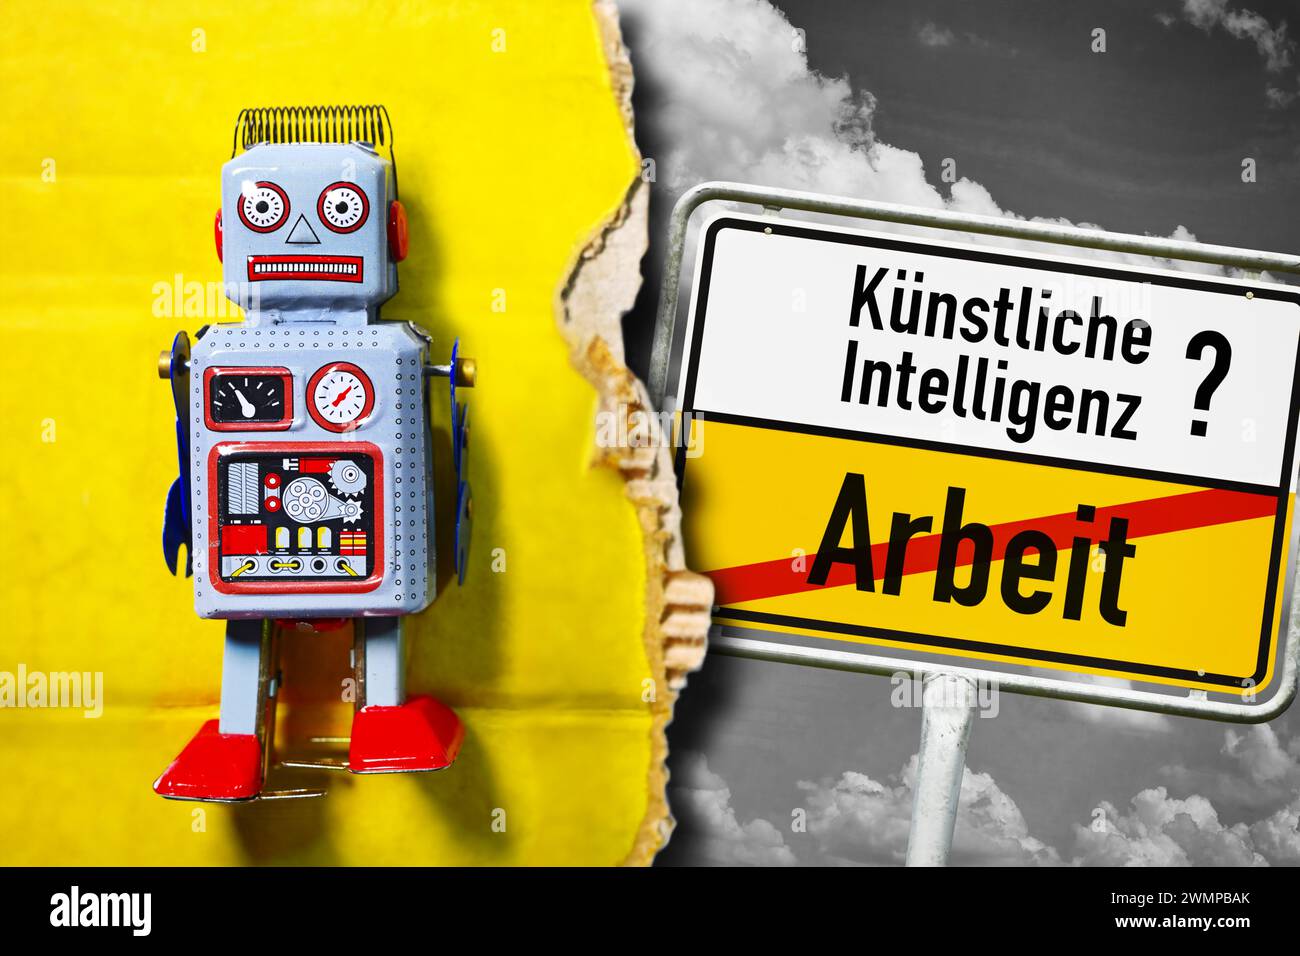 Robot Figure And Town Sign With The Inscription Artificial Intelligence And The Crossed-out Inscription Work, Photomontage Stock Photo